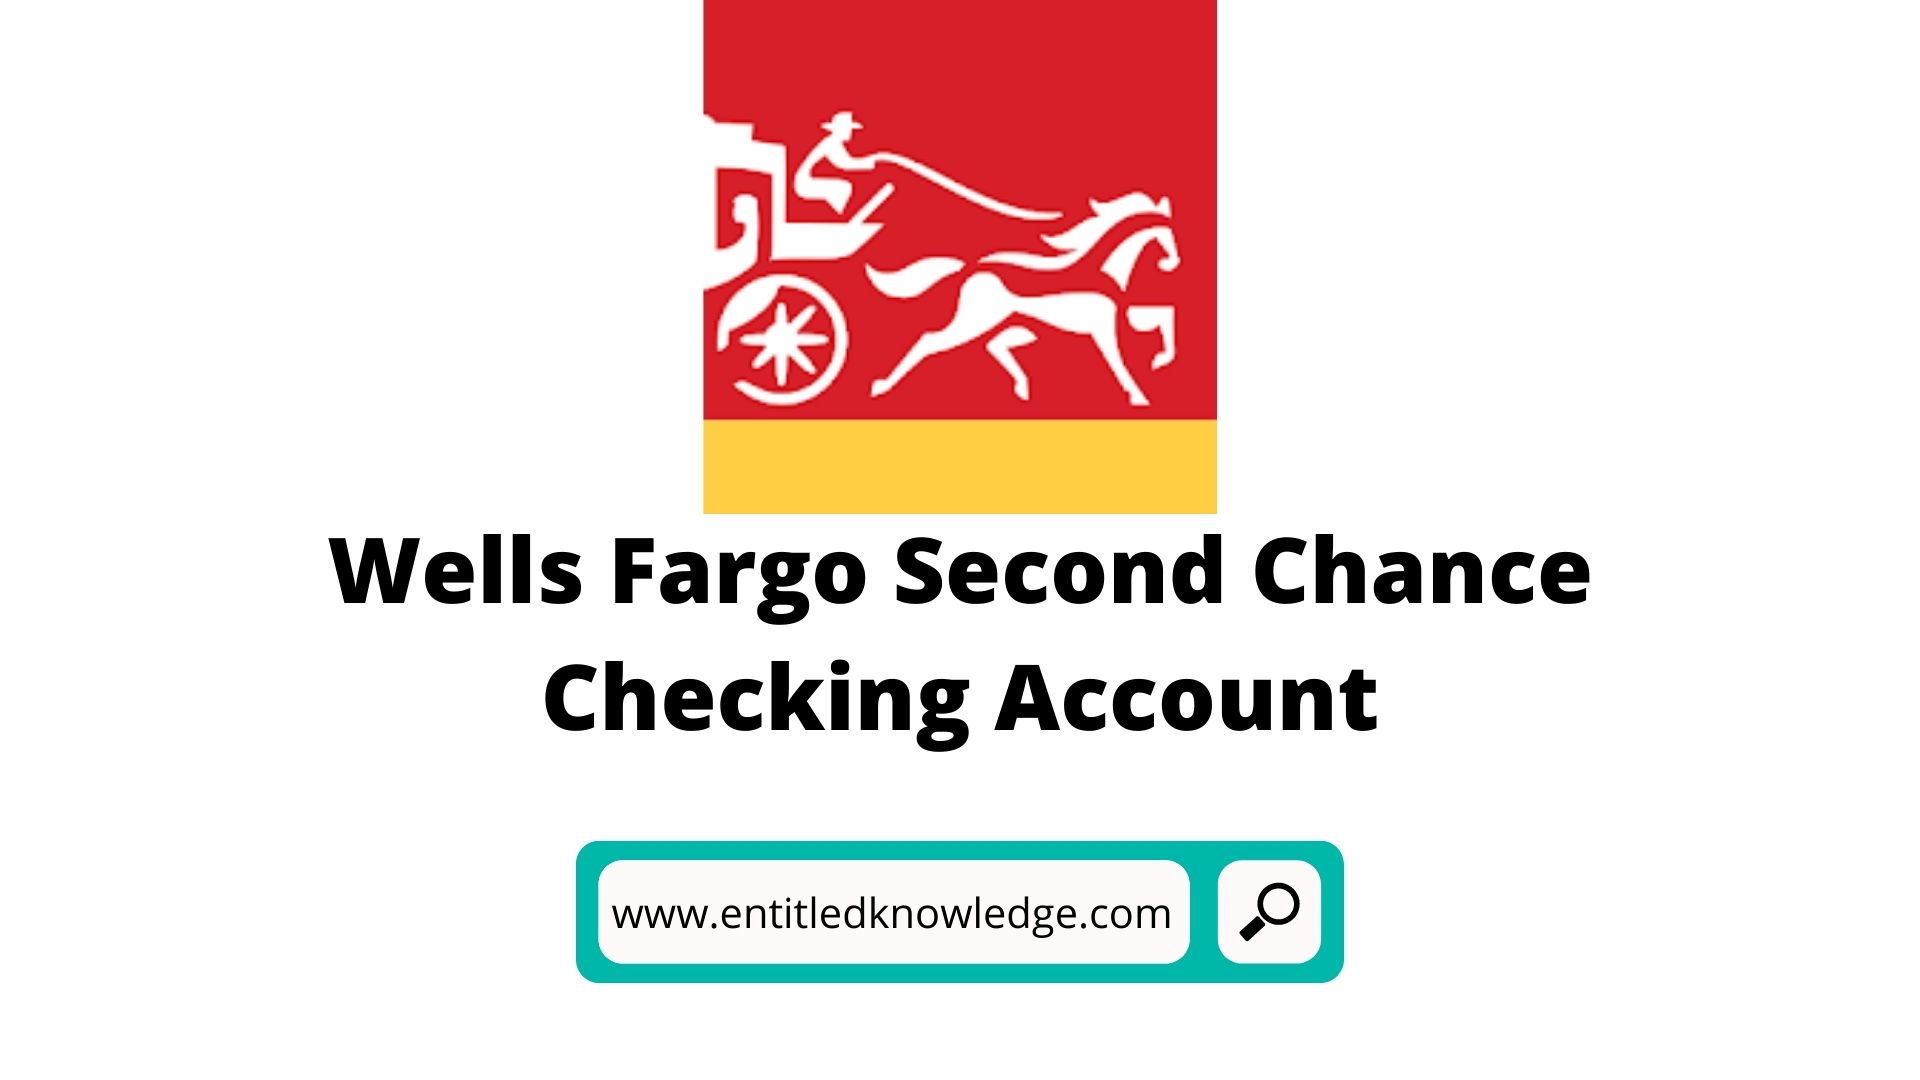 Wells Fargo Second Chance Checking Account